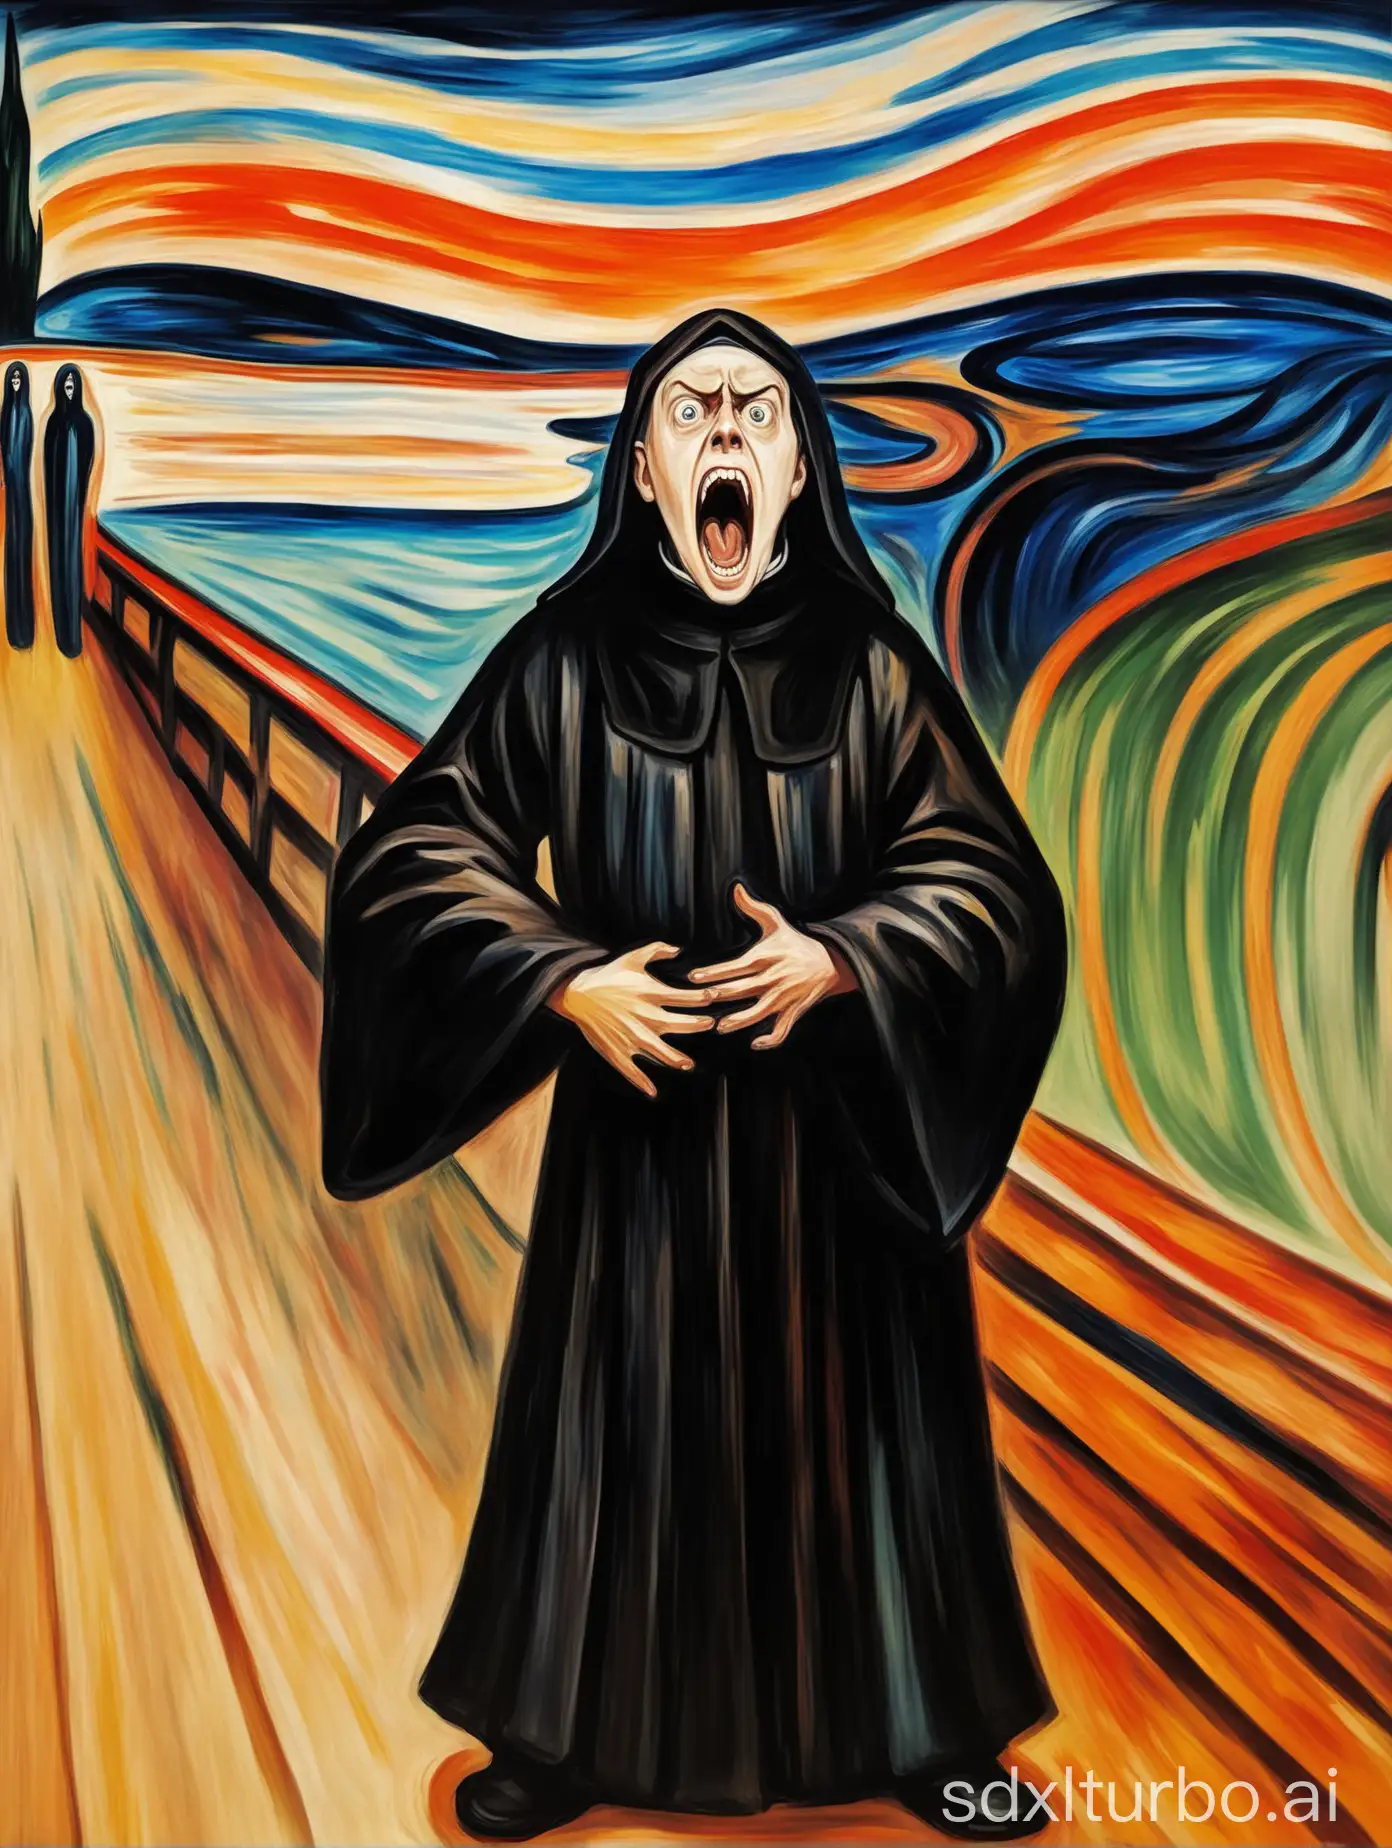 edvard munch's the scream but depicting a renaissance friar screaming like the central figure in the painting, stylised, oil painting, like the painting